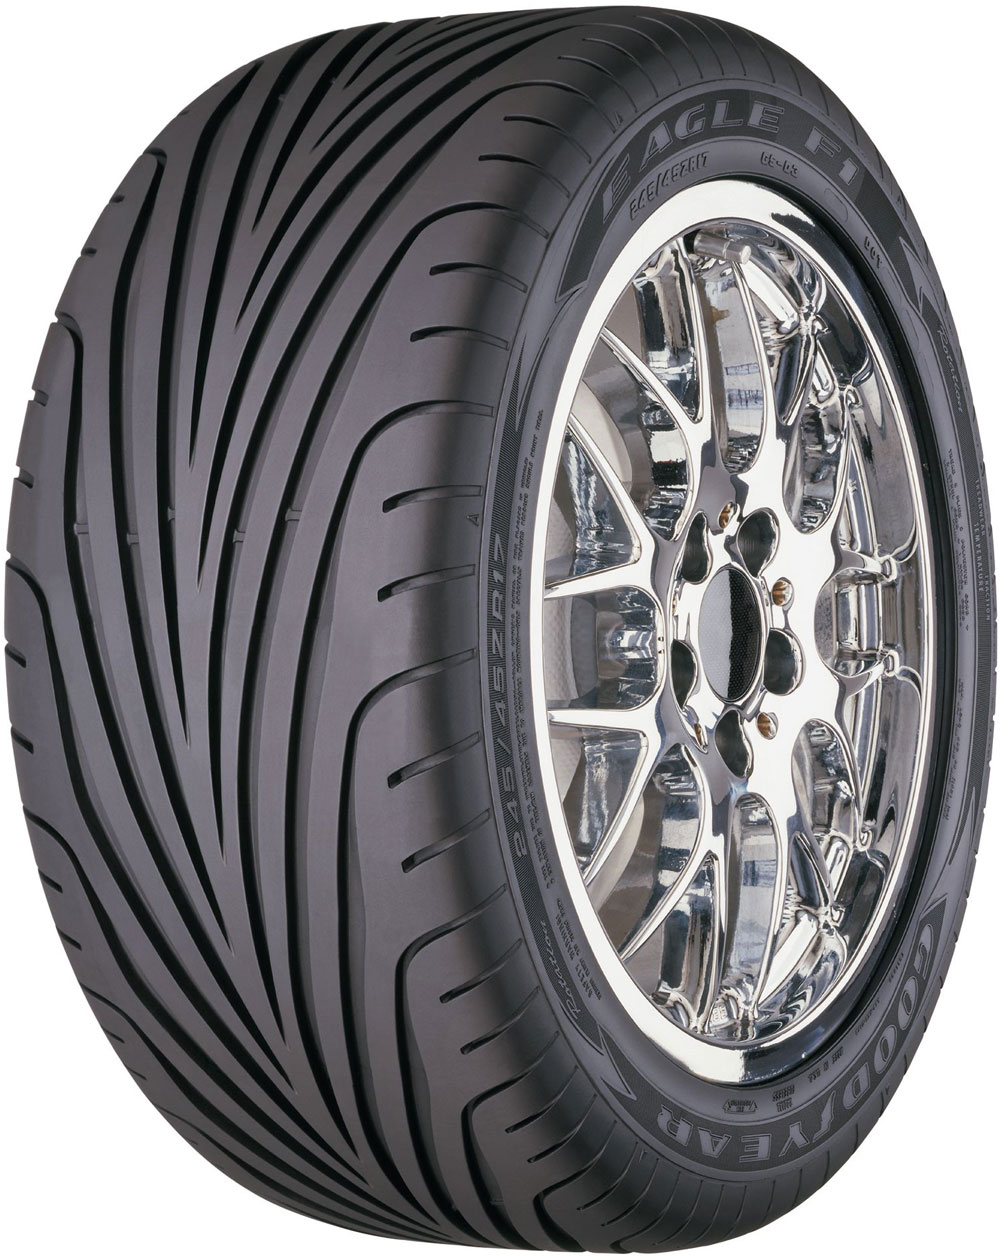 Anvelope auto GOODYEAR EAGLE F1 GS-D3 VW 235/50 R18 97